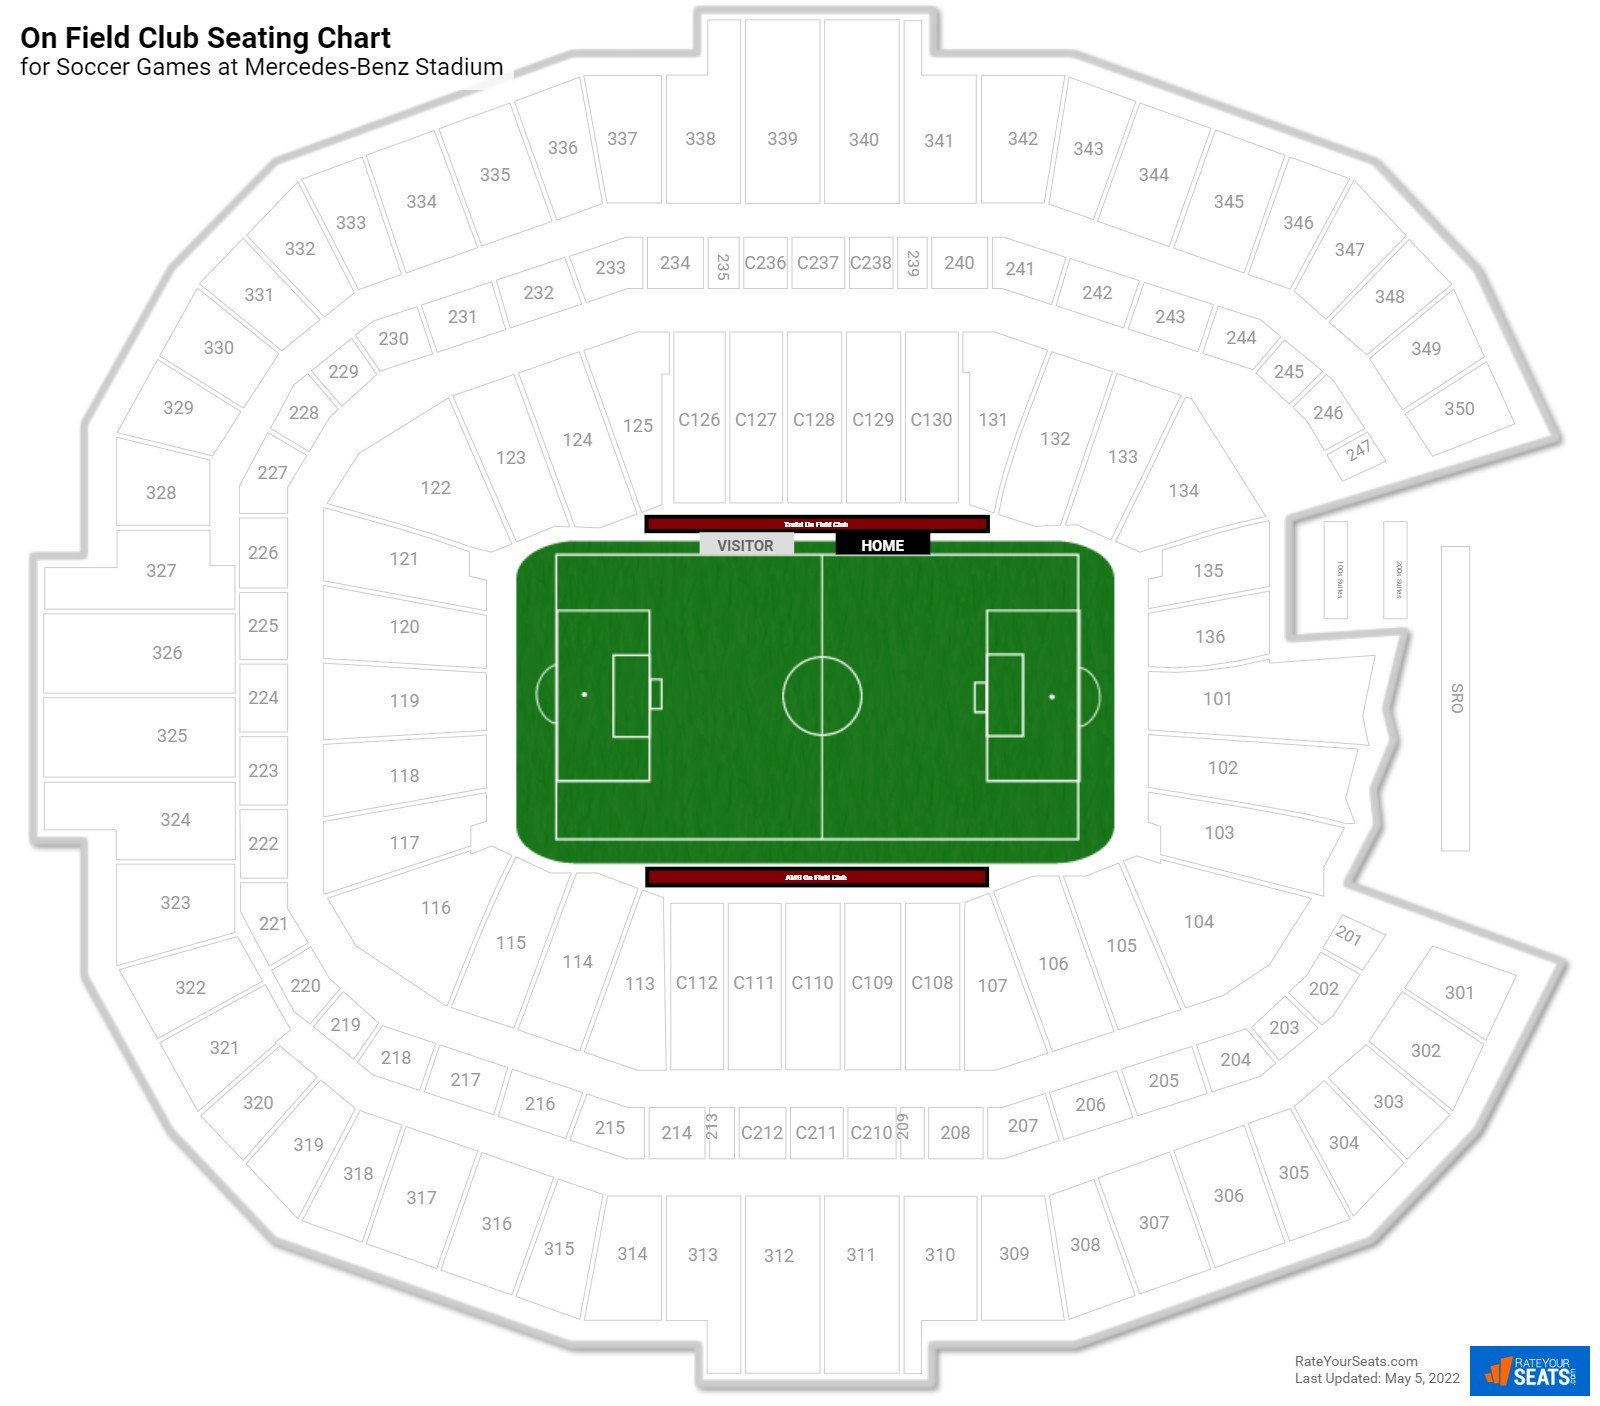 Soccer On Field Club Seating Chart at Mercedes-Benz Stadium